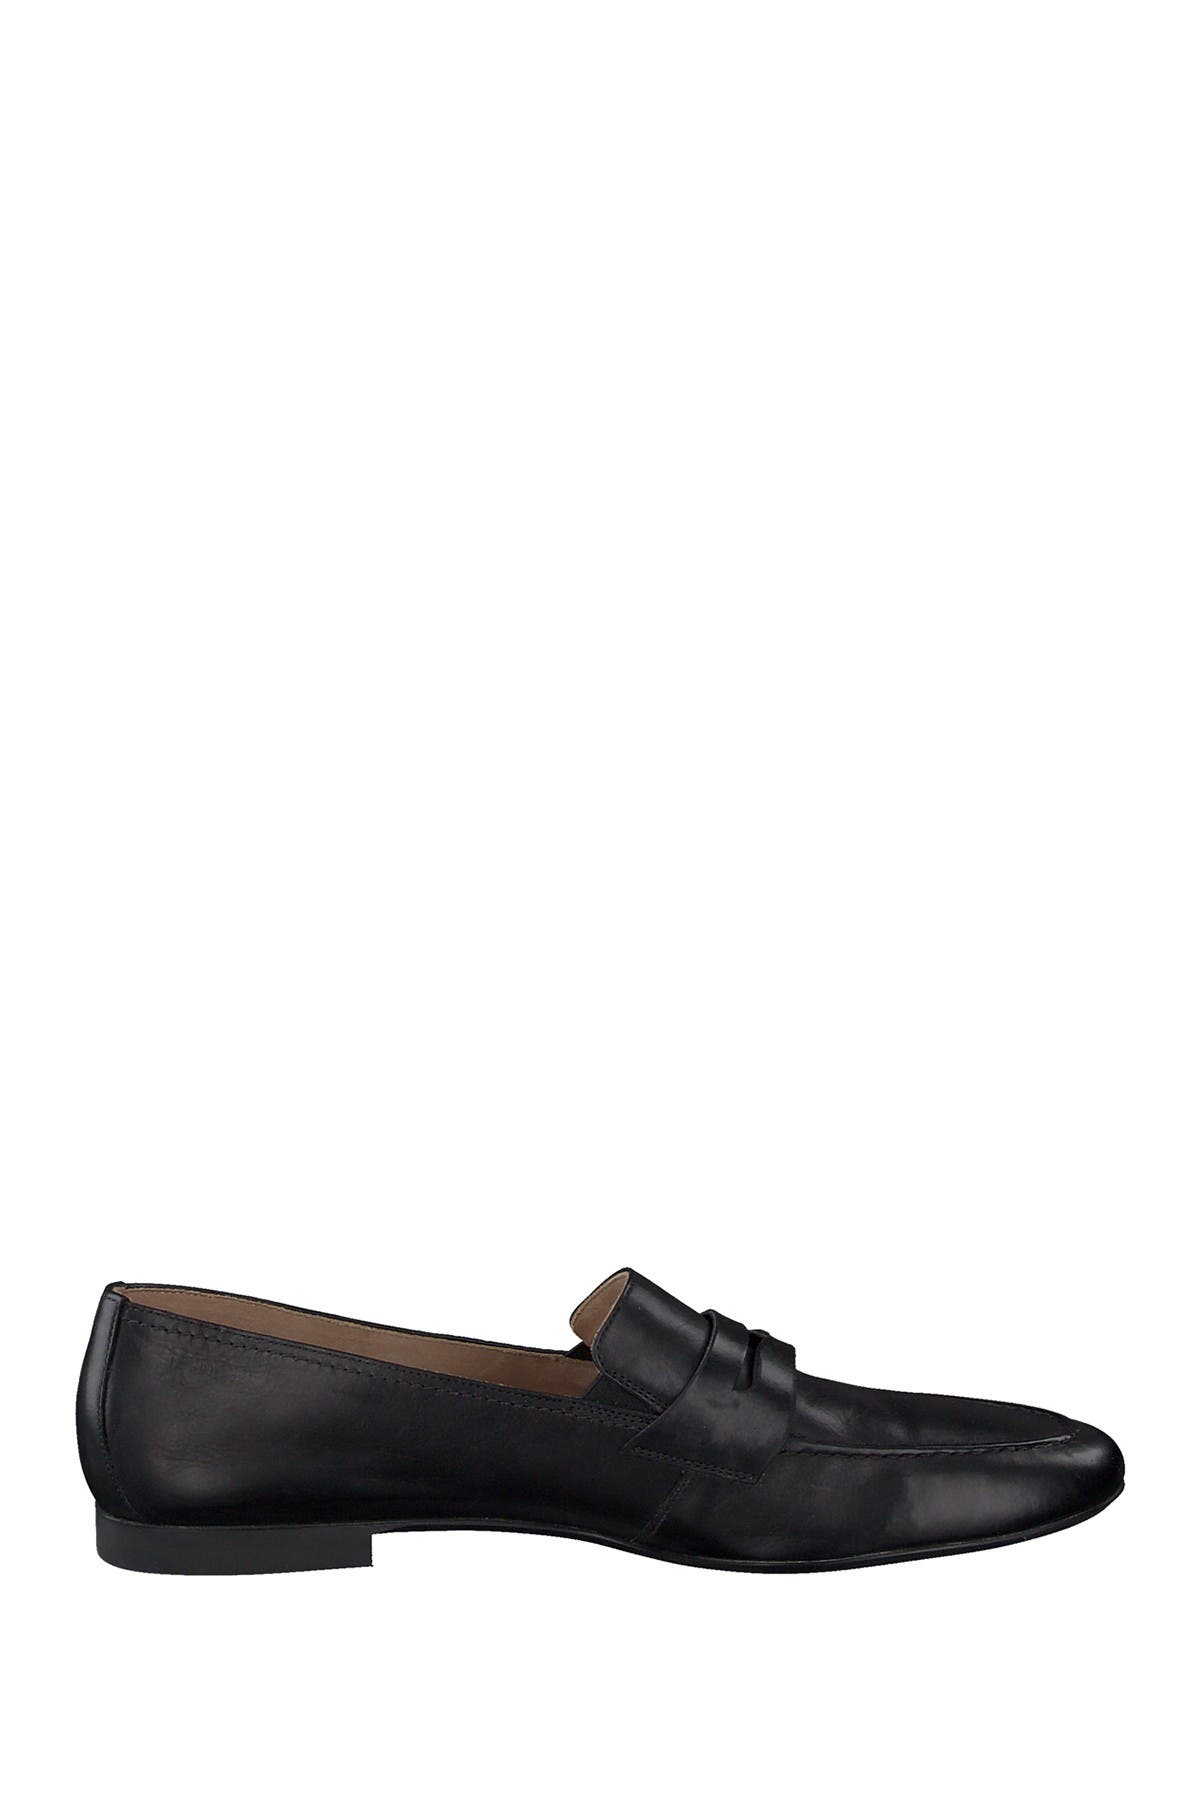 paul green penny loafer